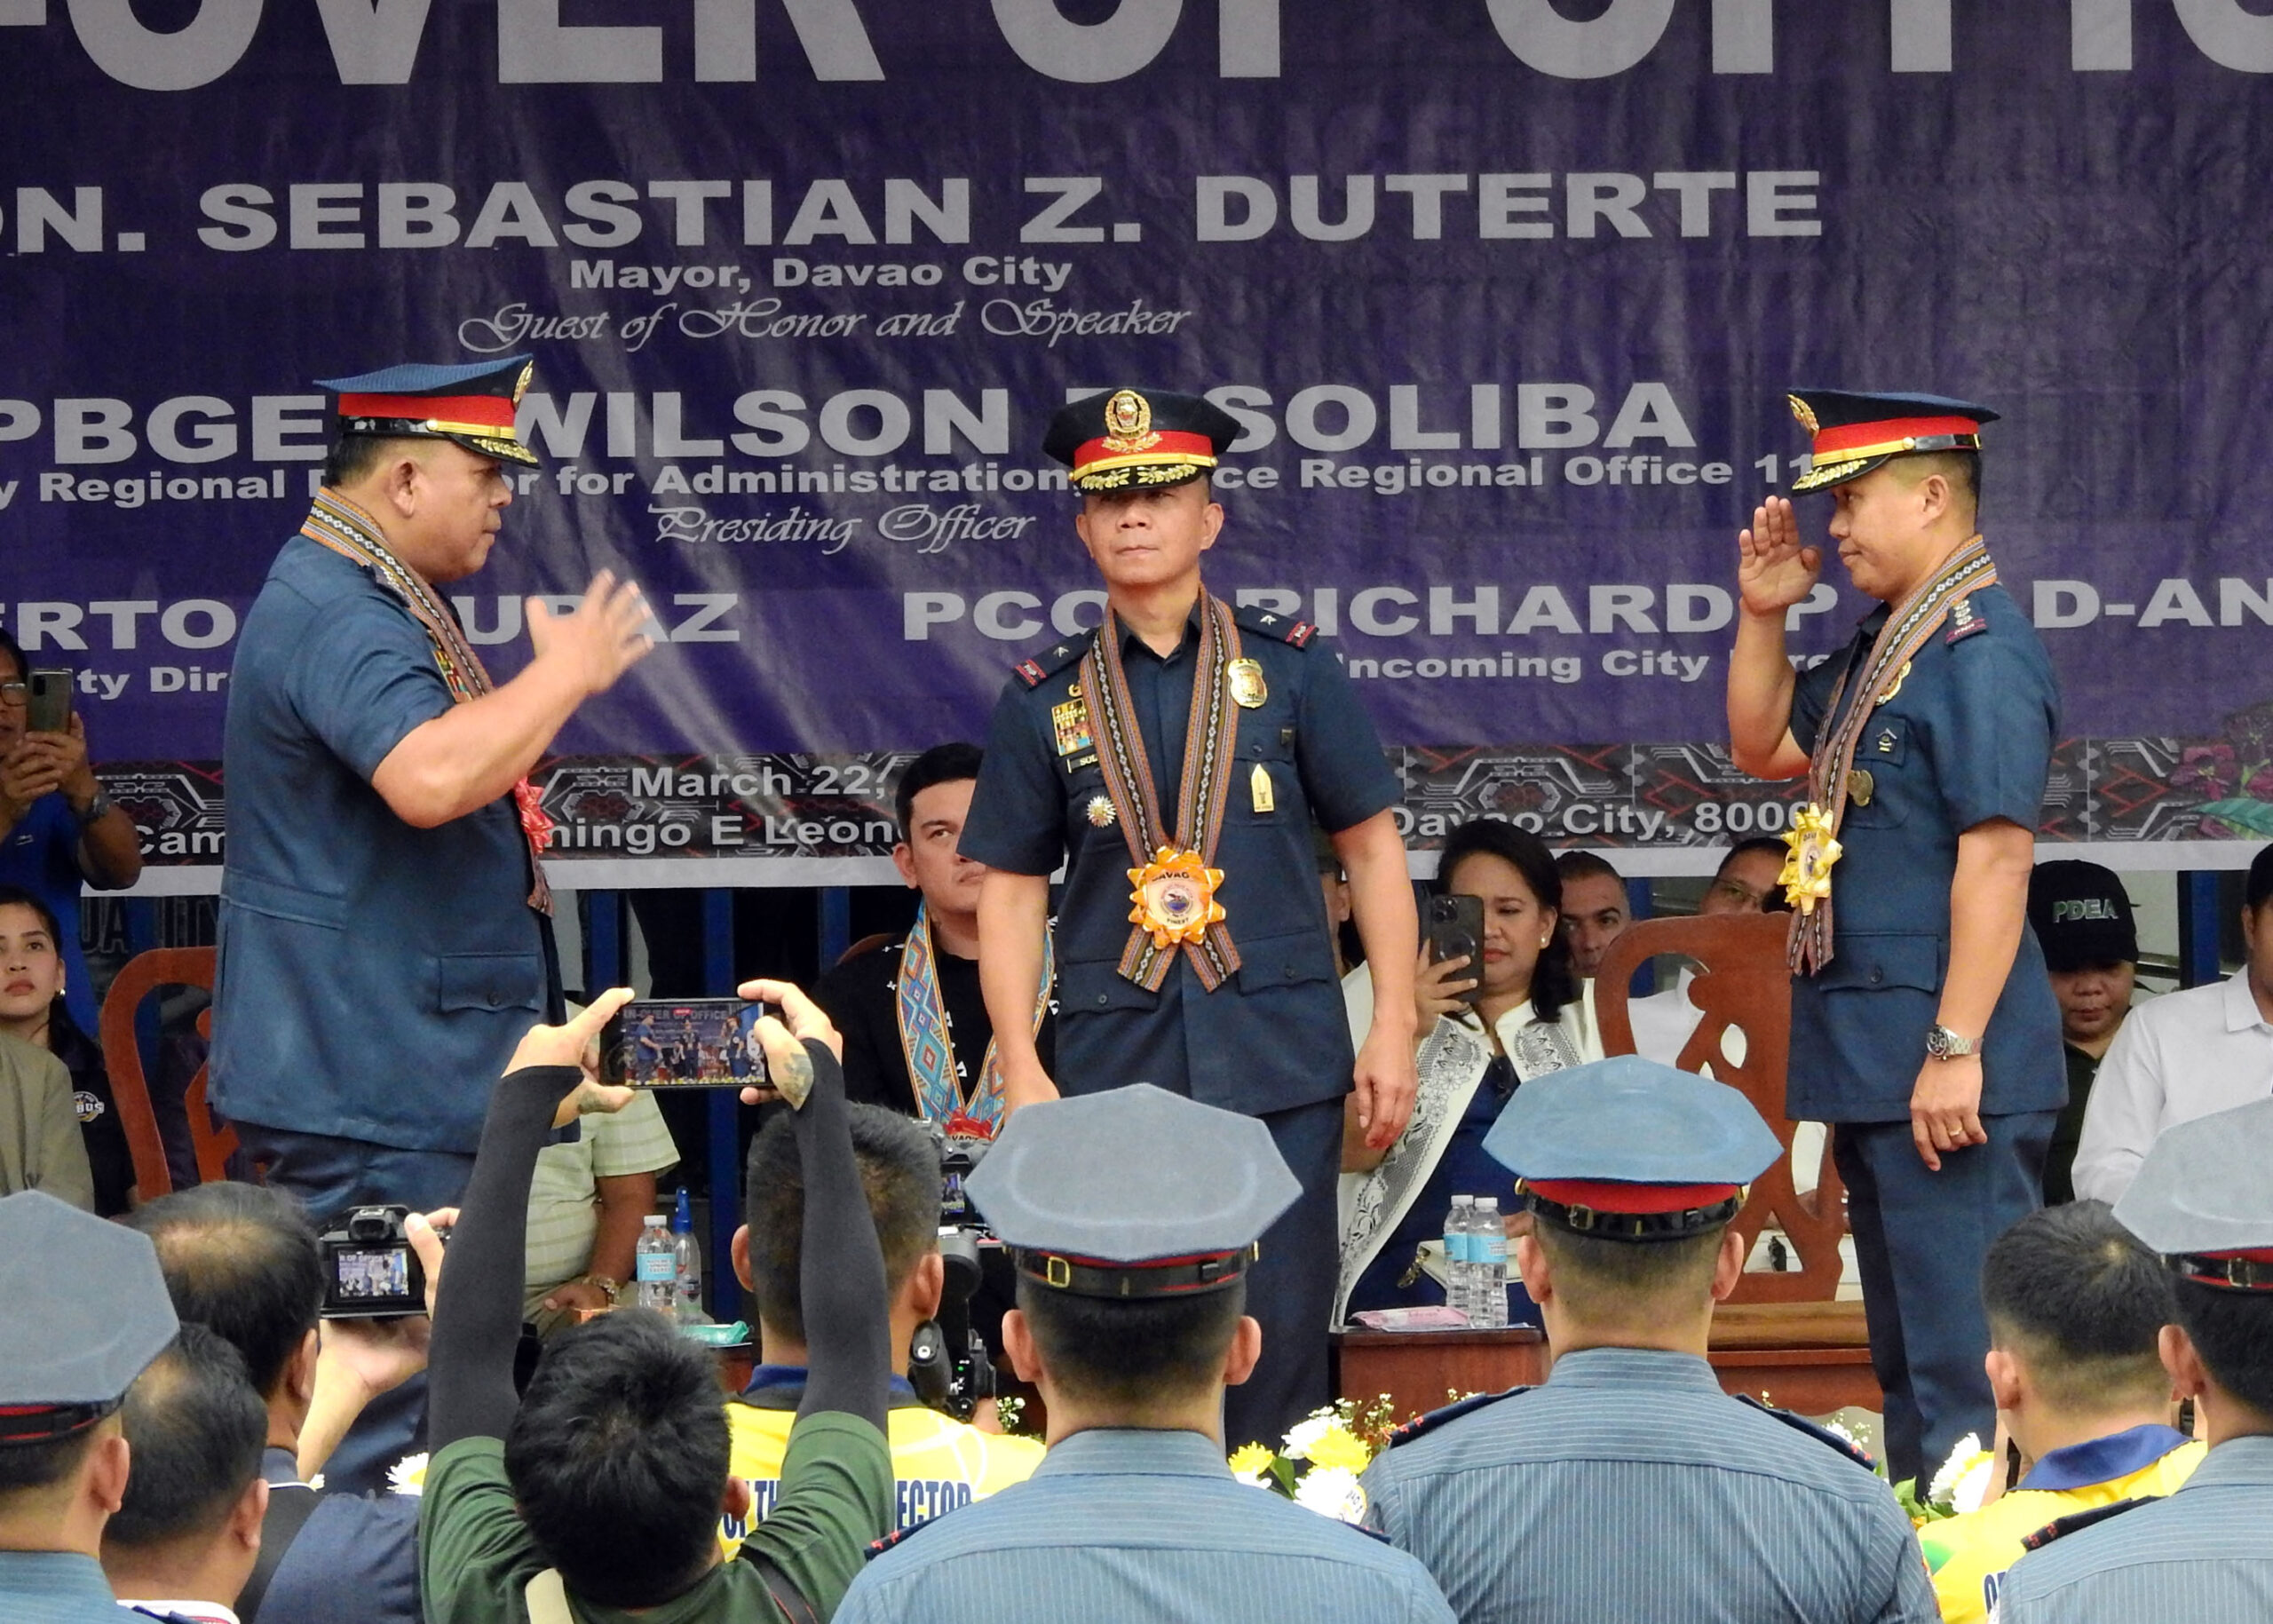 Col. Richard Bad-ang has assumed as the new chief of the Davao City Police Office 